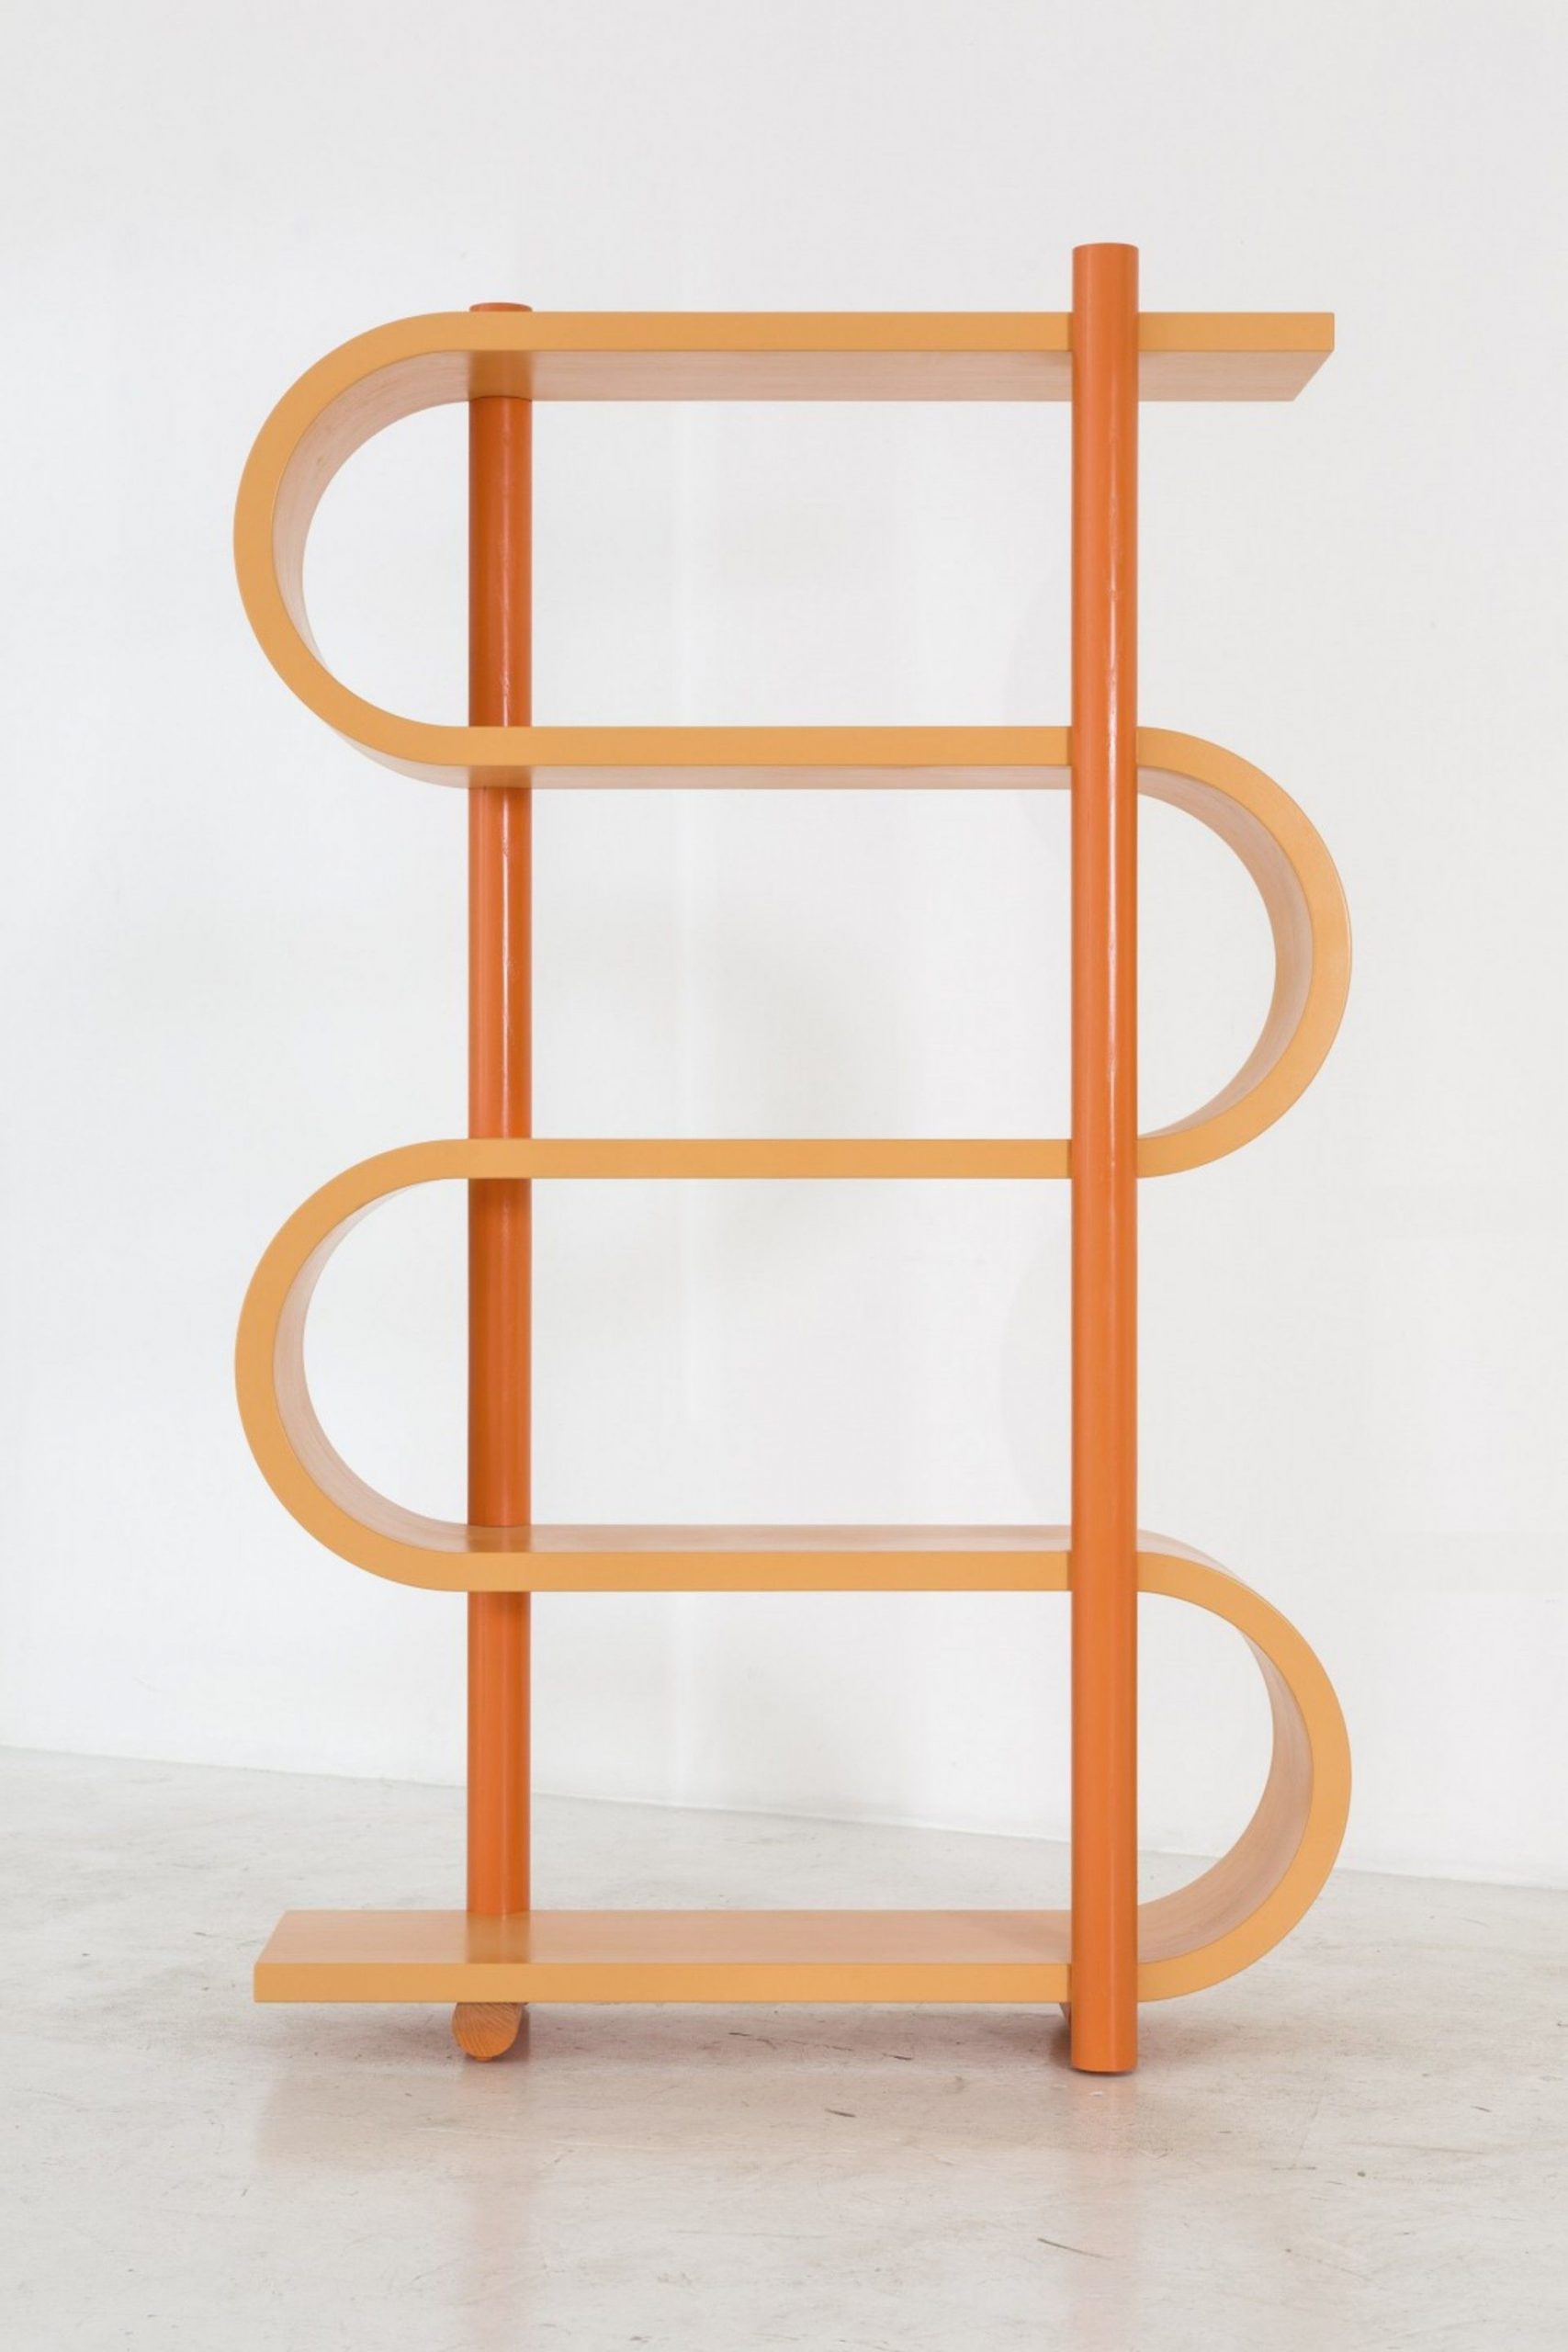 Squiggle Shelf by Katie Stout for exhibition Docile/Domicile/Dandy at Gallery Diet, Miami 2015